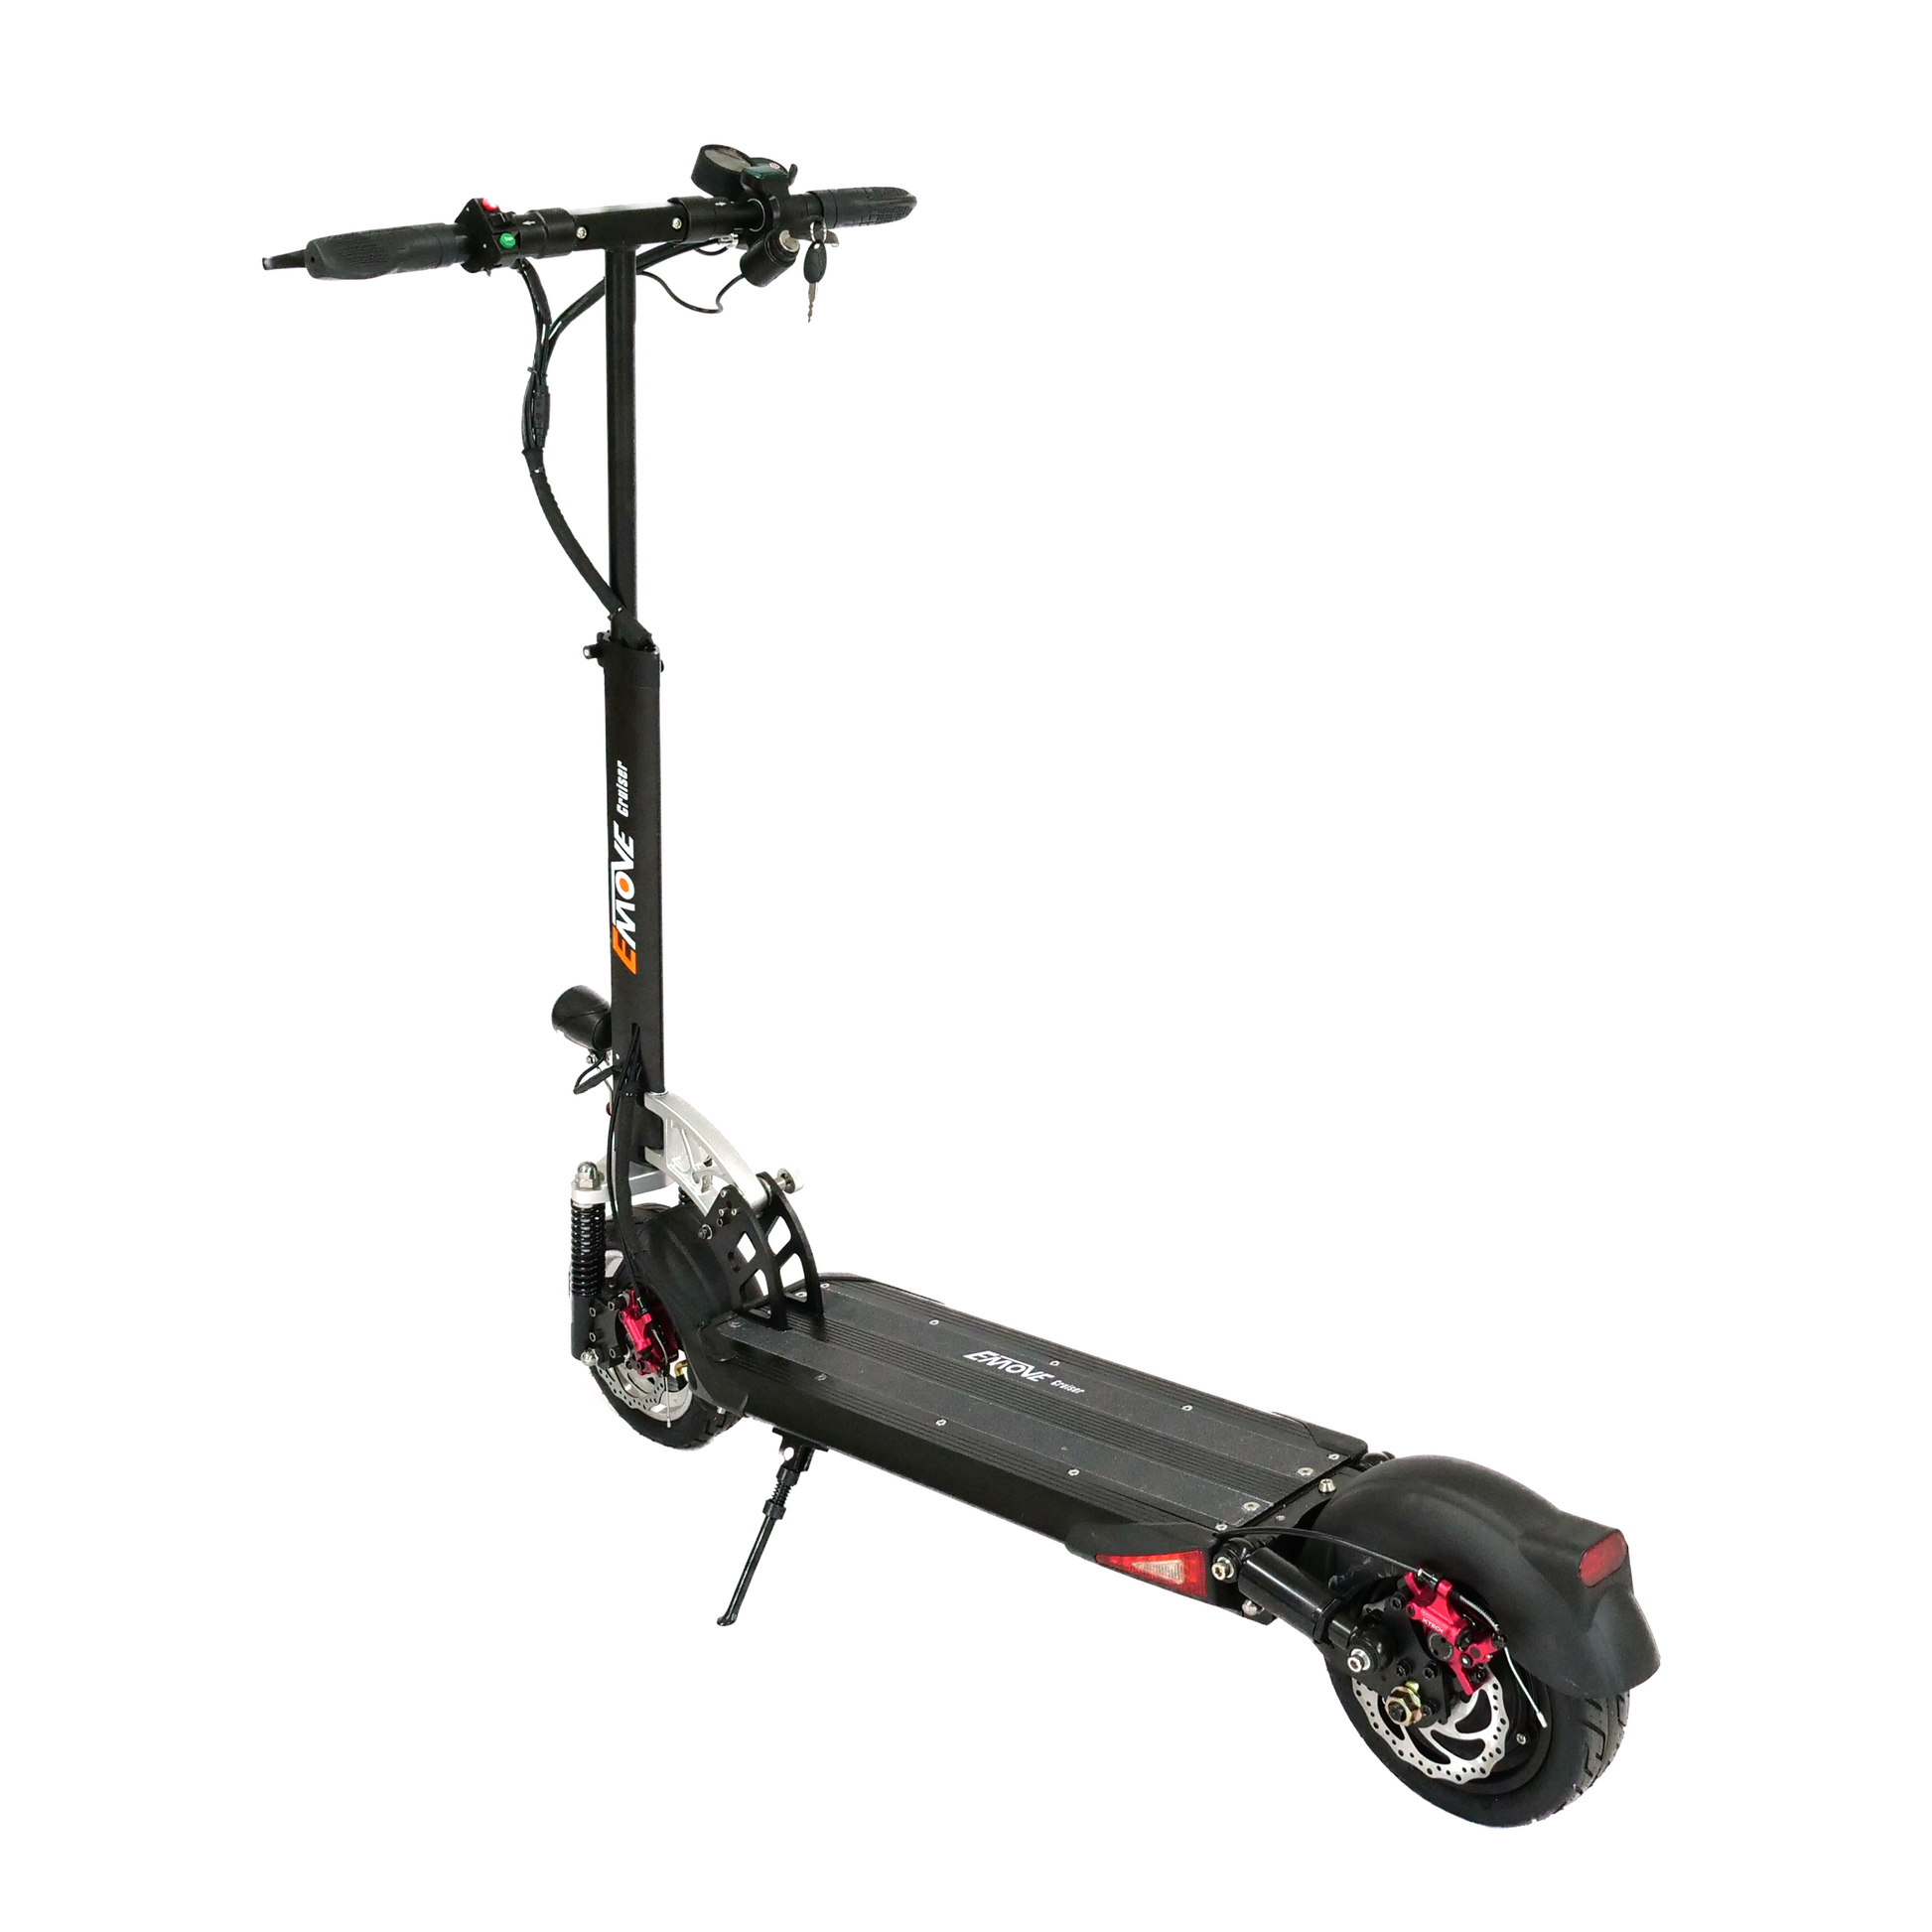 EMOVE Cruiser S 52V 1600W Dual Suspension Long Range Electric Scoote – WYRDRYDS